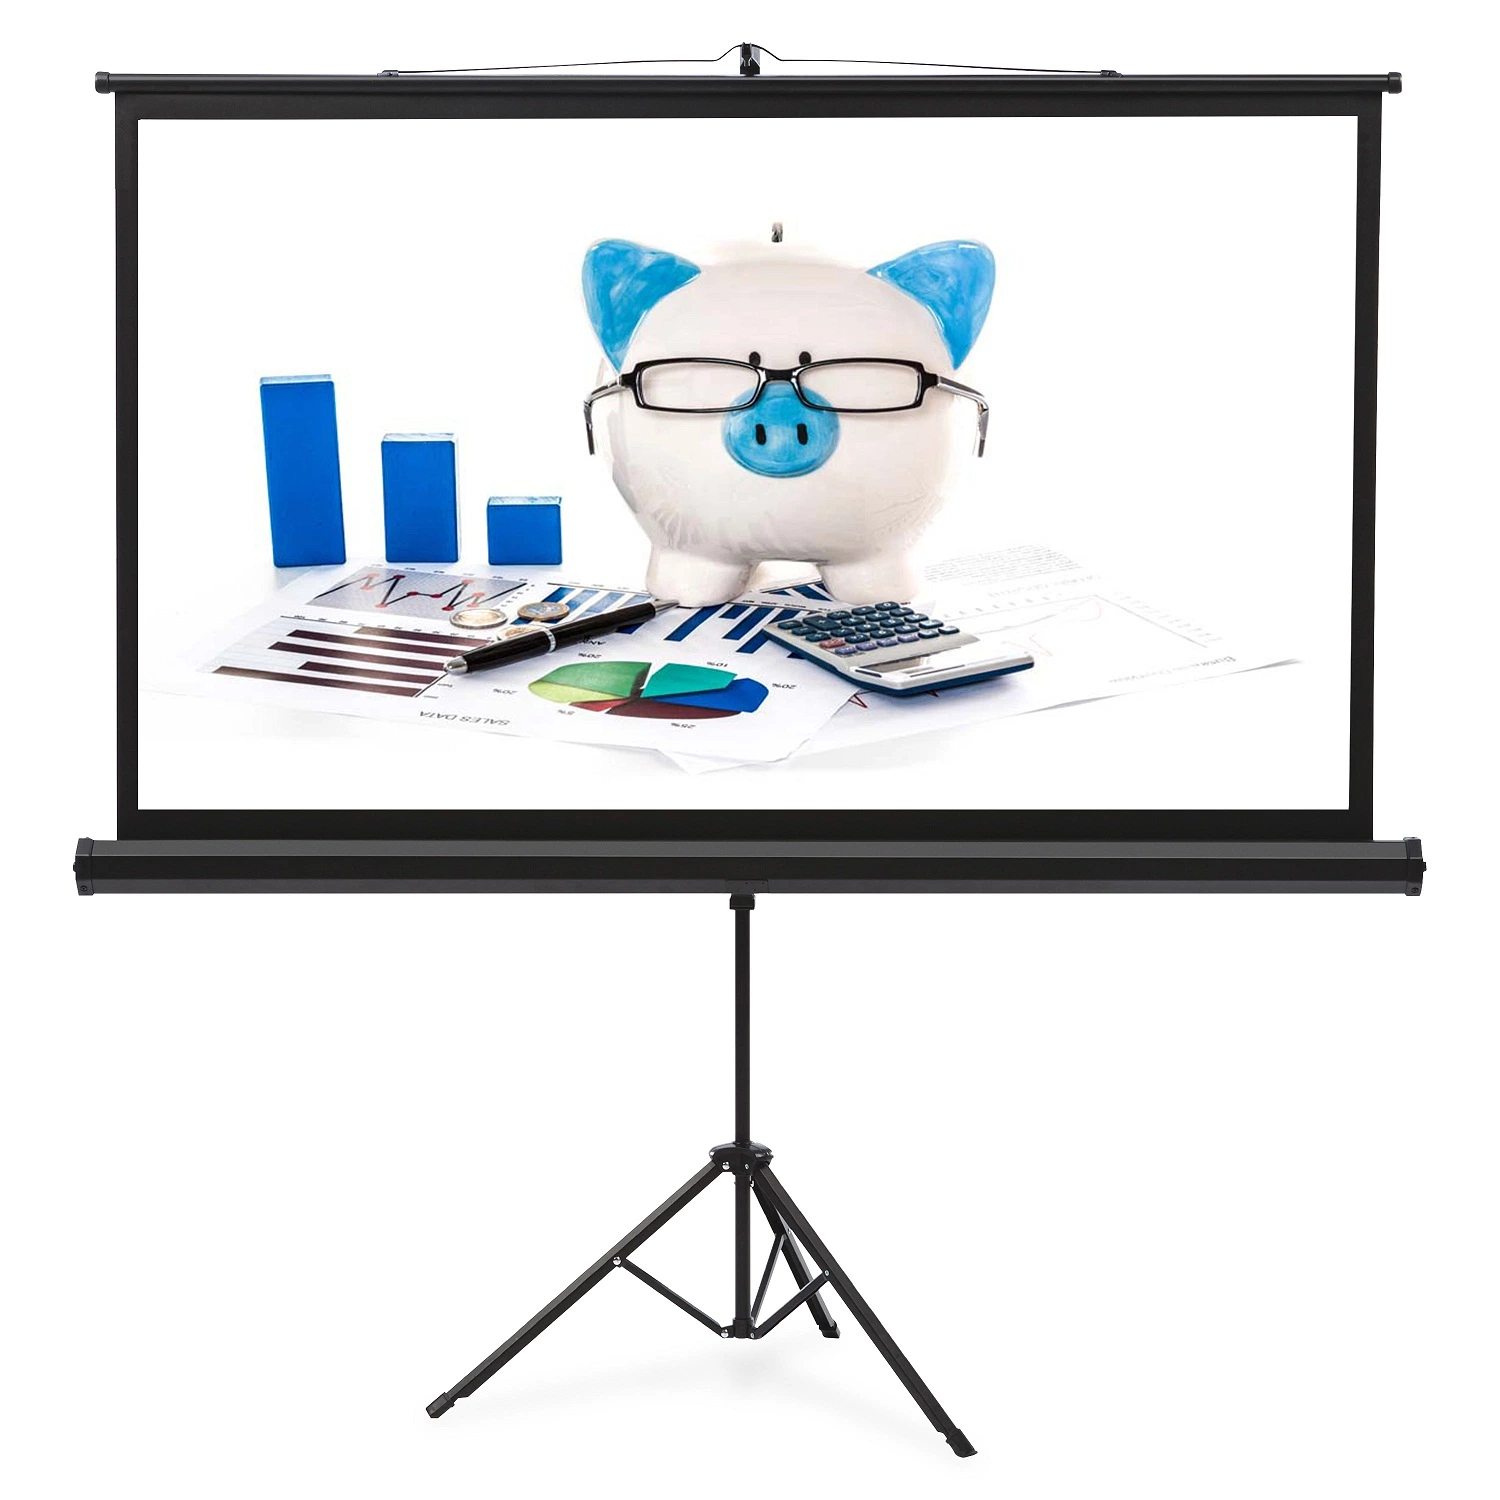 70"X70"Tripod Floor Standing Projection Screens for Education